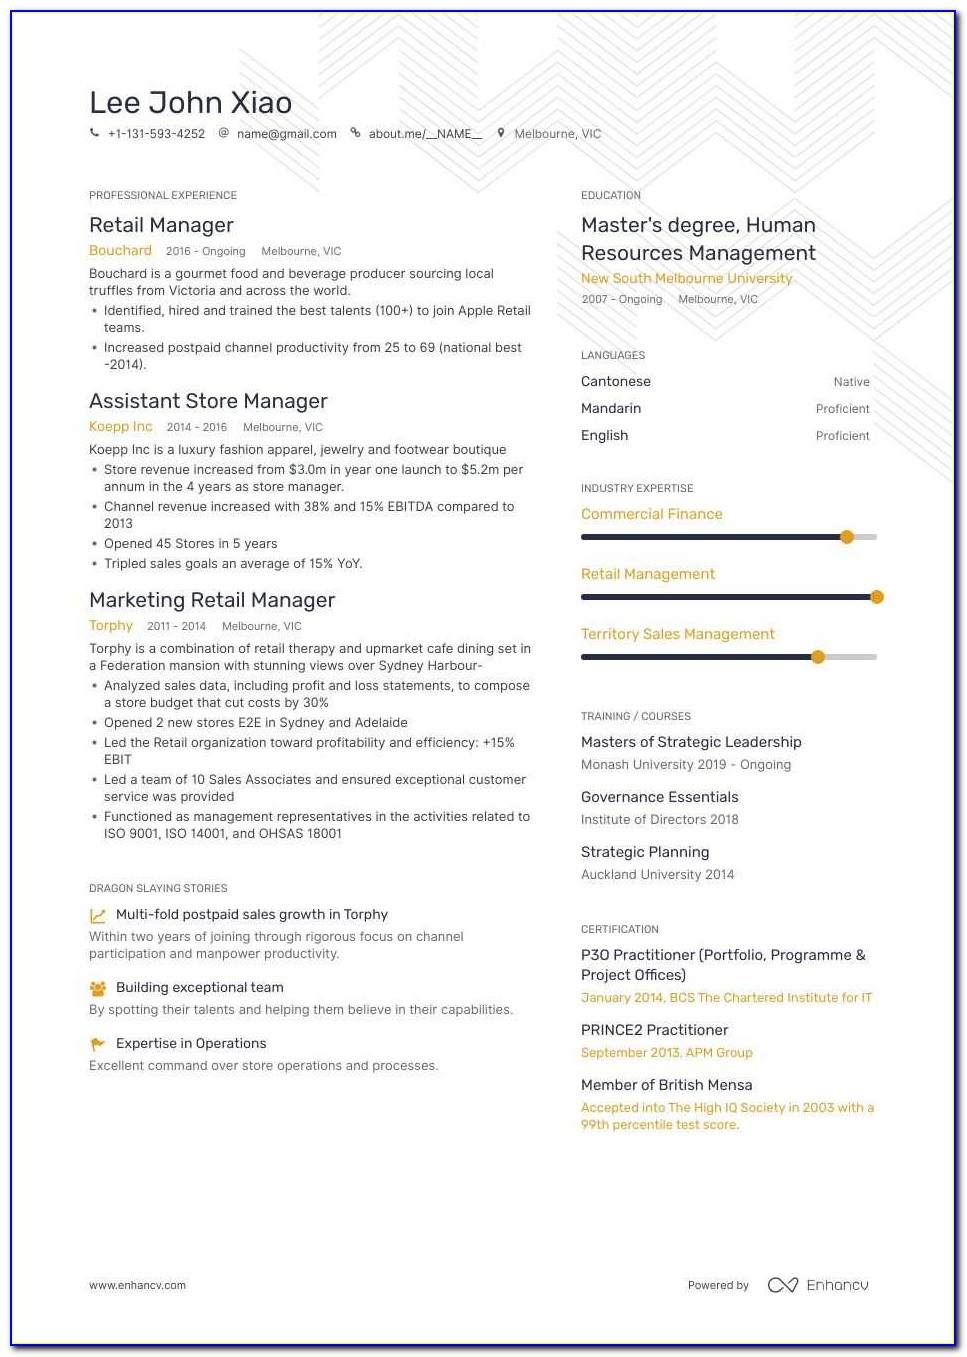 Resume Format For Assistant Manager Quality